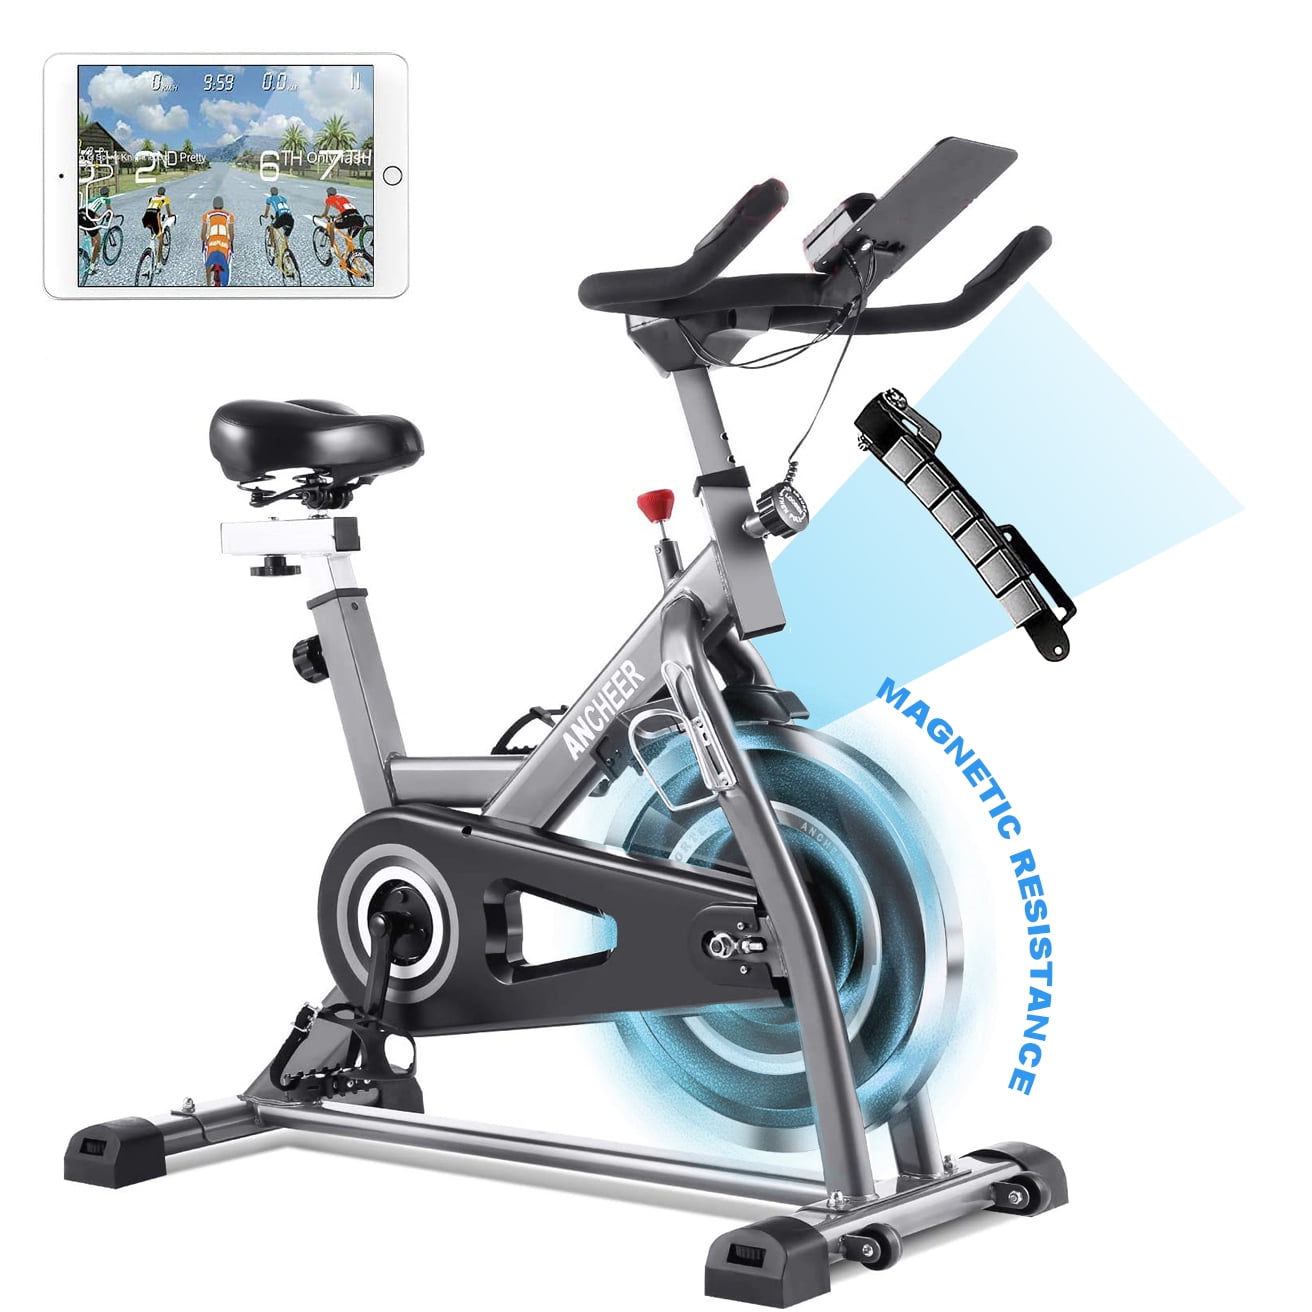 Details about   Pro Stationary Exercise Bike Bicycle Cycling Fitness Cardio Gym Home Workout 